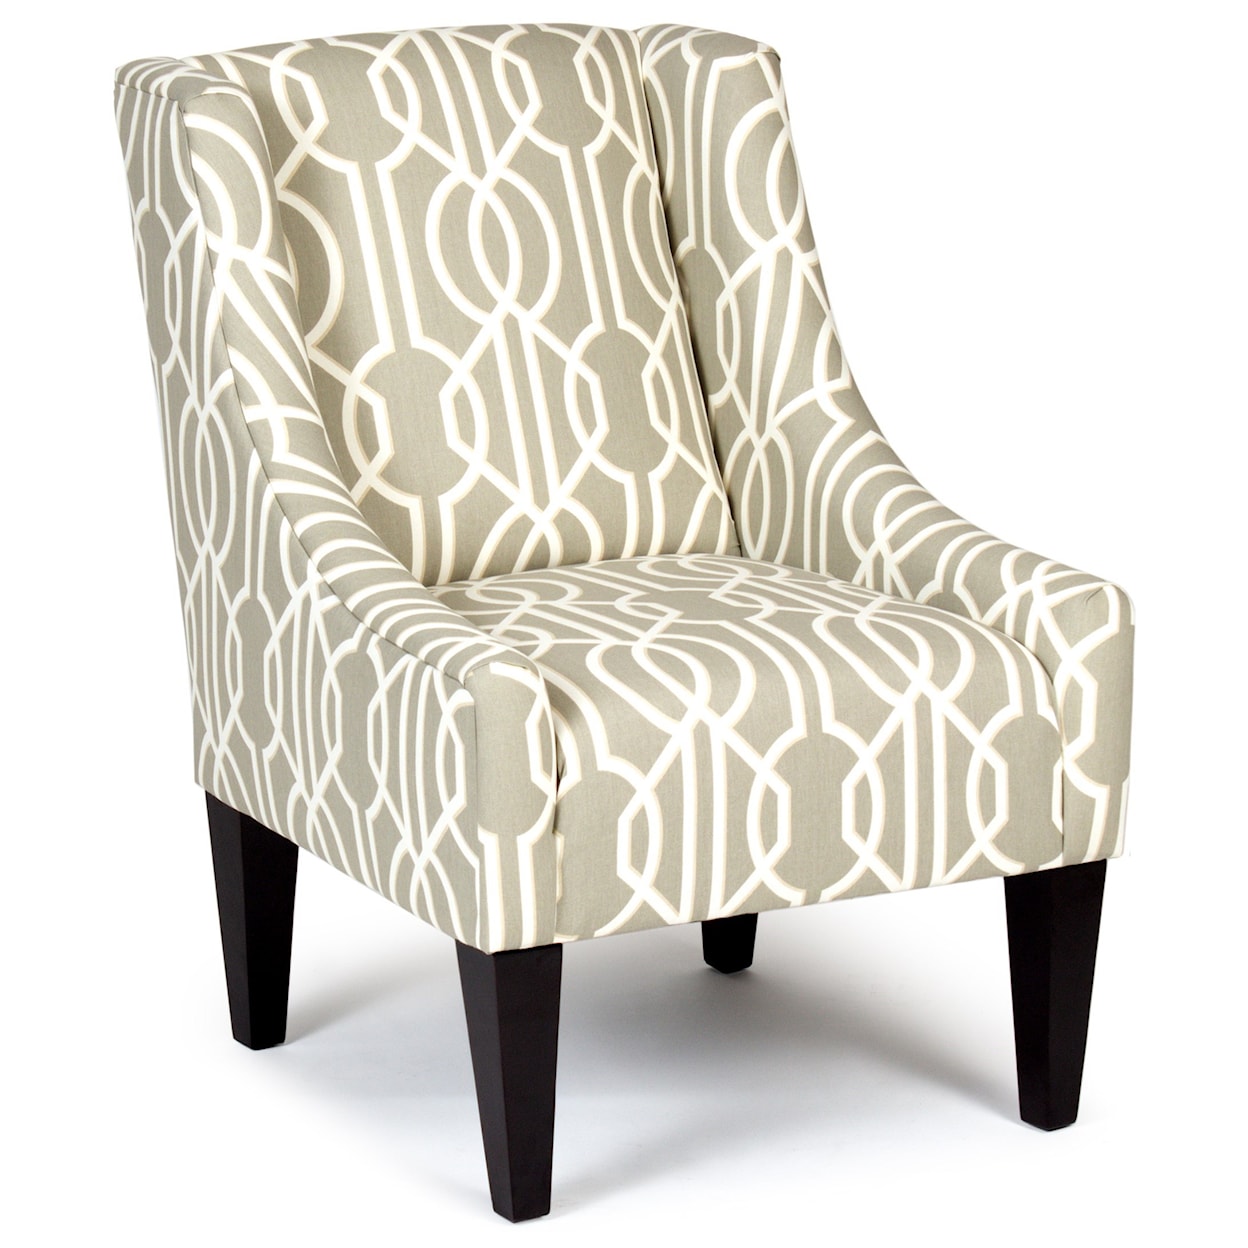 Chairs America Accent Chairs and Ottomans Accent Chair